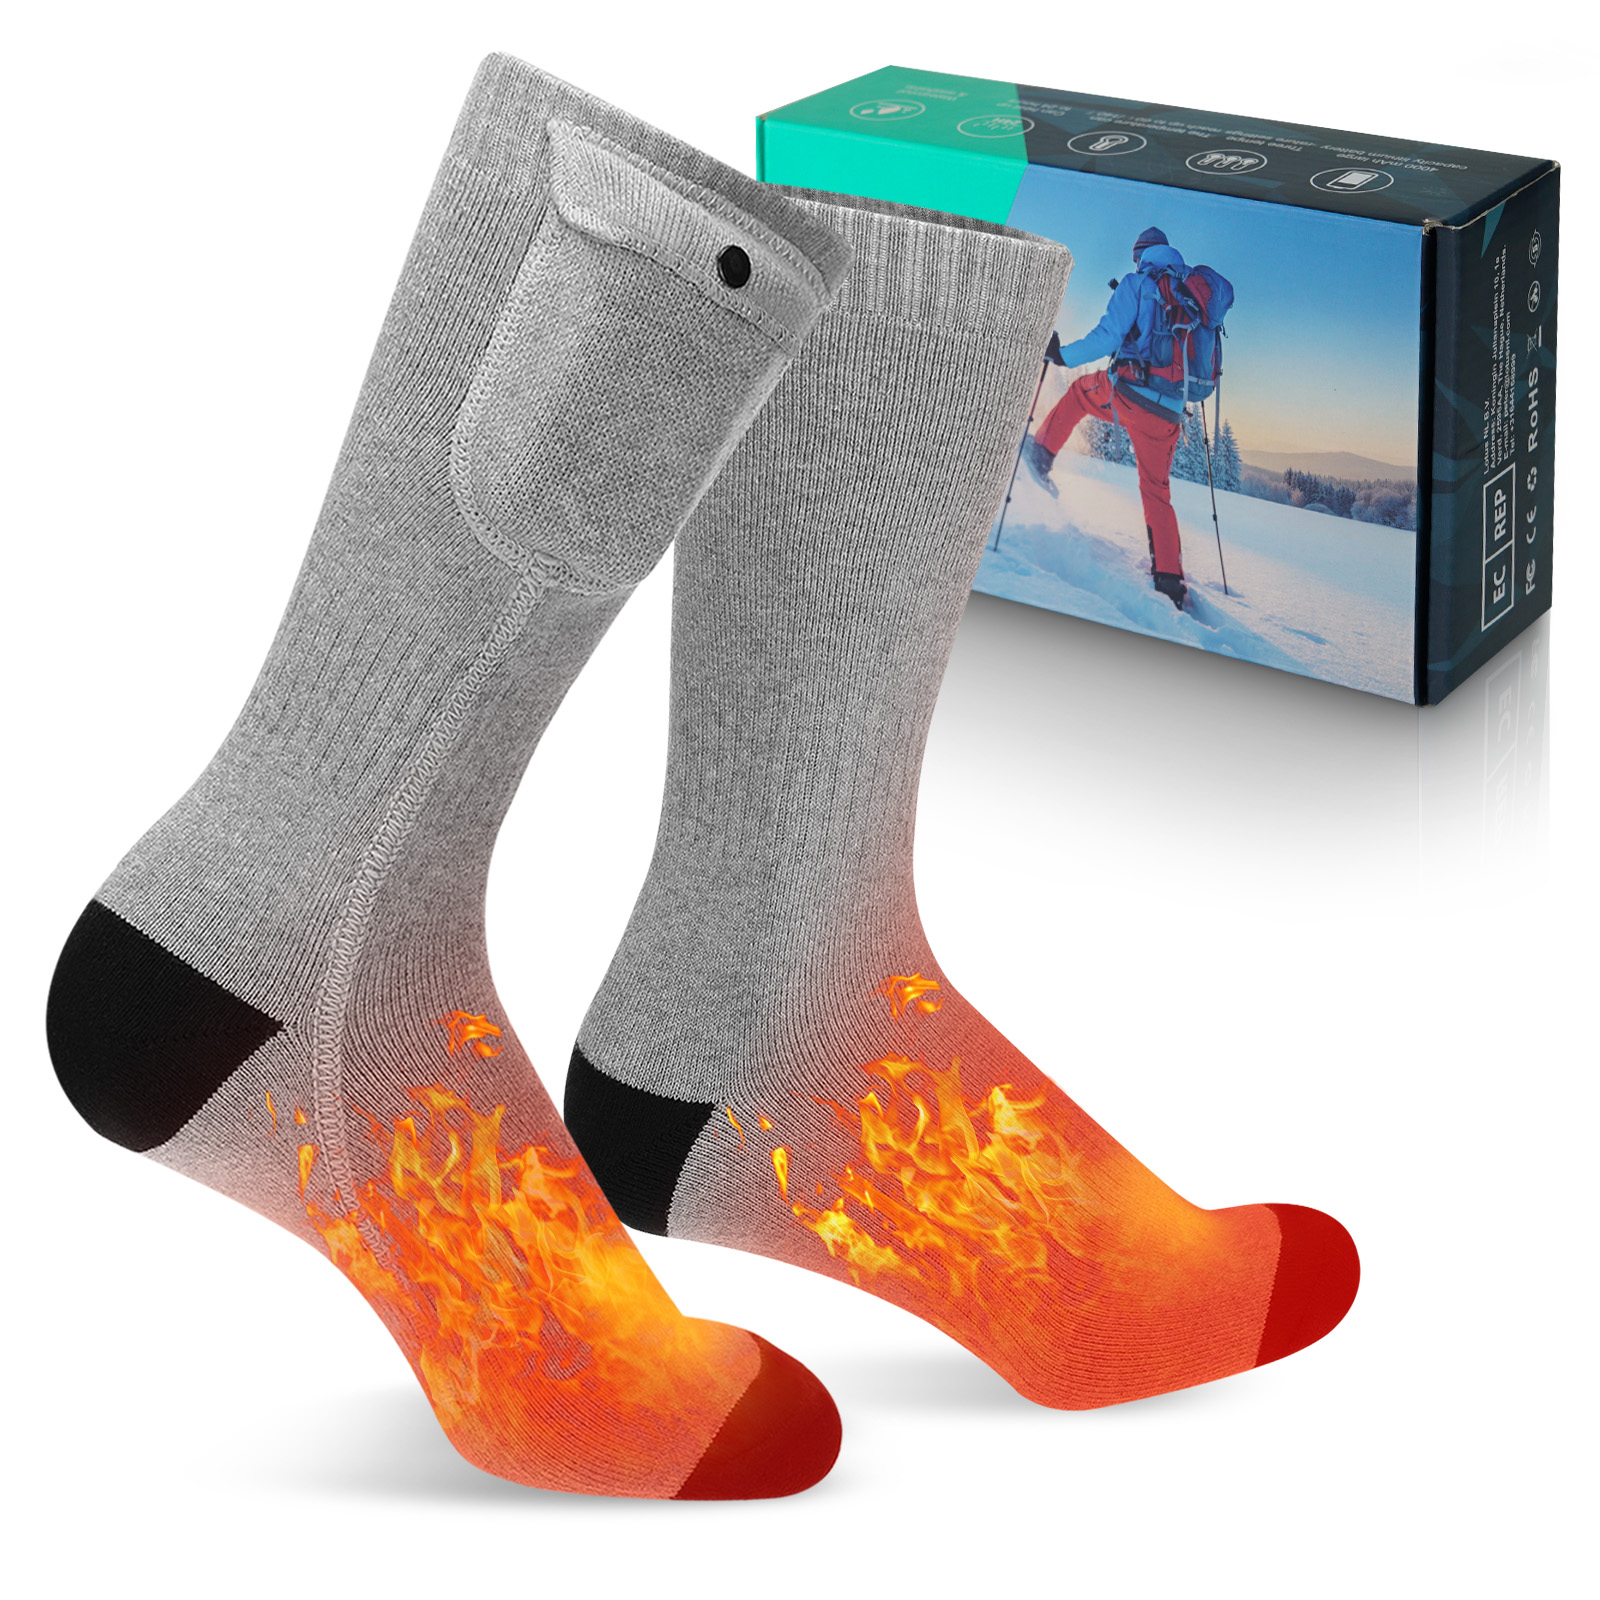 Down and Up Heating Rechargeable Socks Heated Socks Electric Heating Socks 